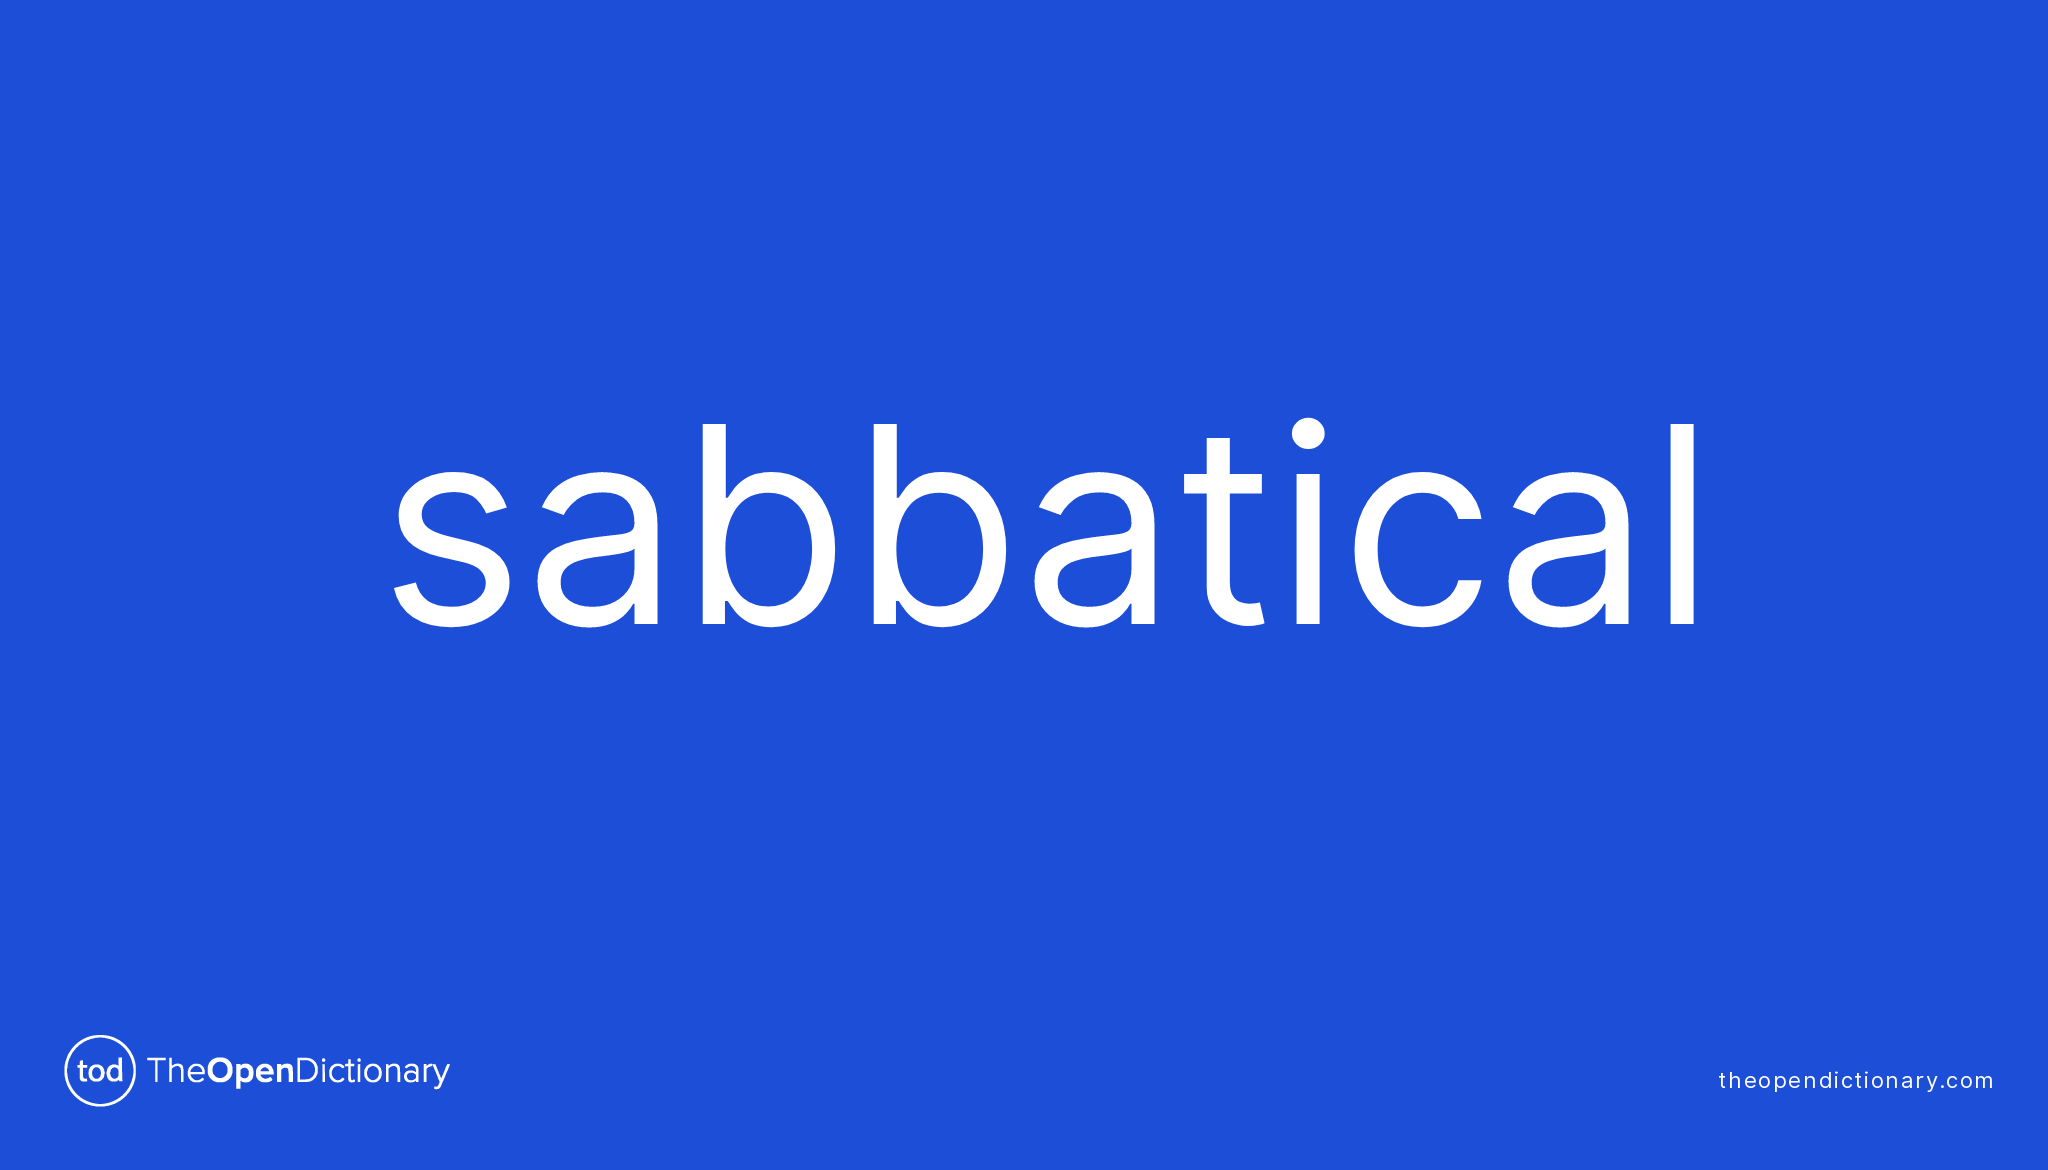 Sabbatical Meaning Of Sabbatical Definition Of Sabbatical Example Of Sabbatical